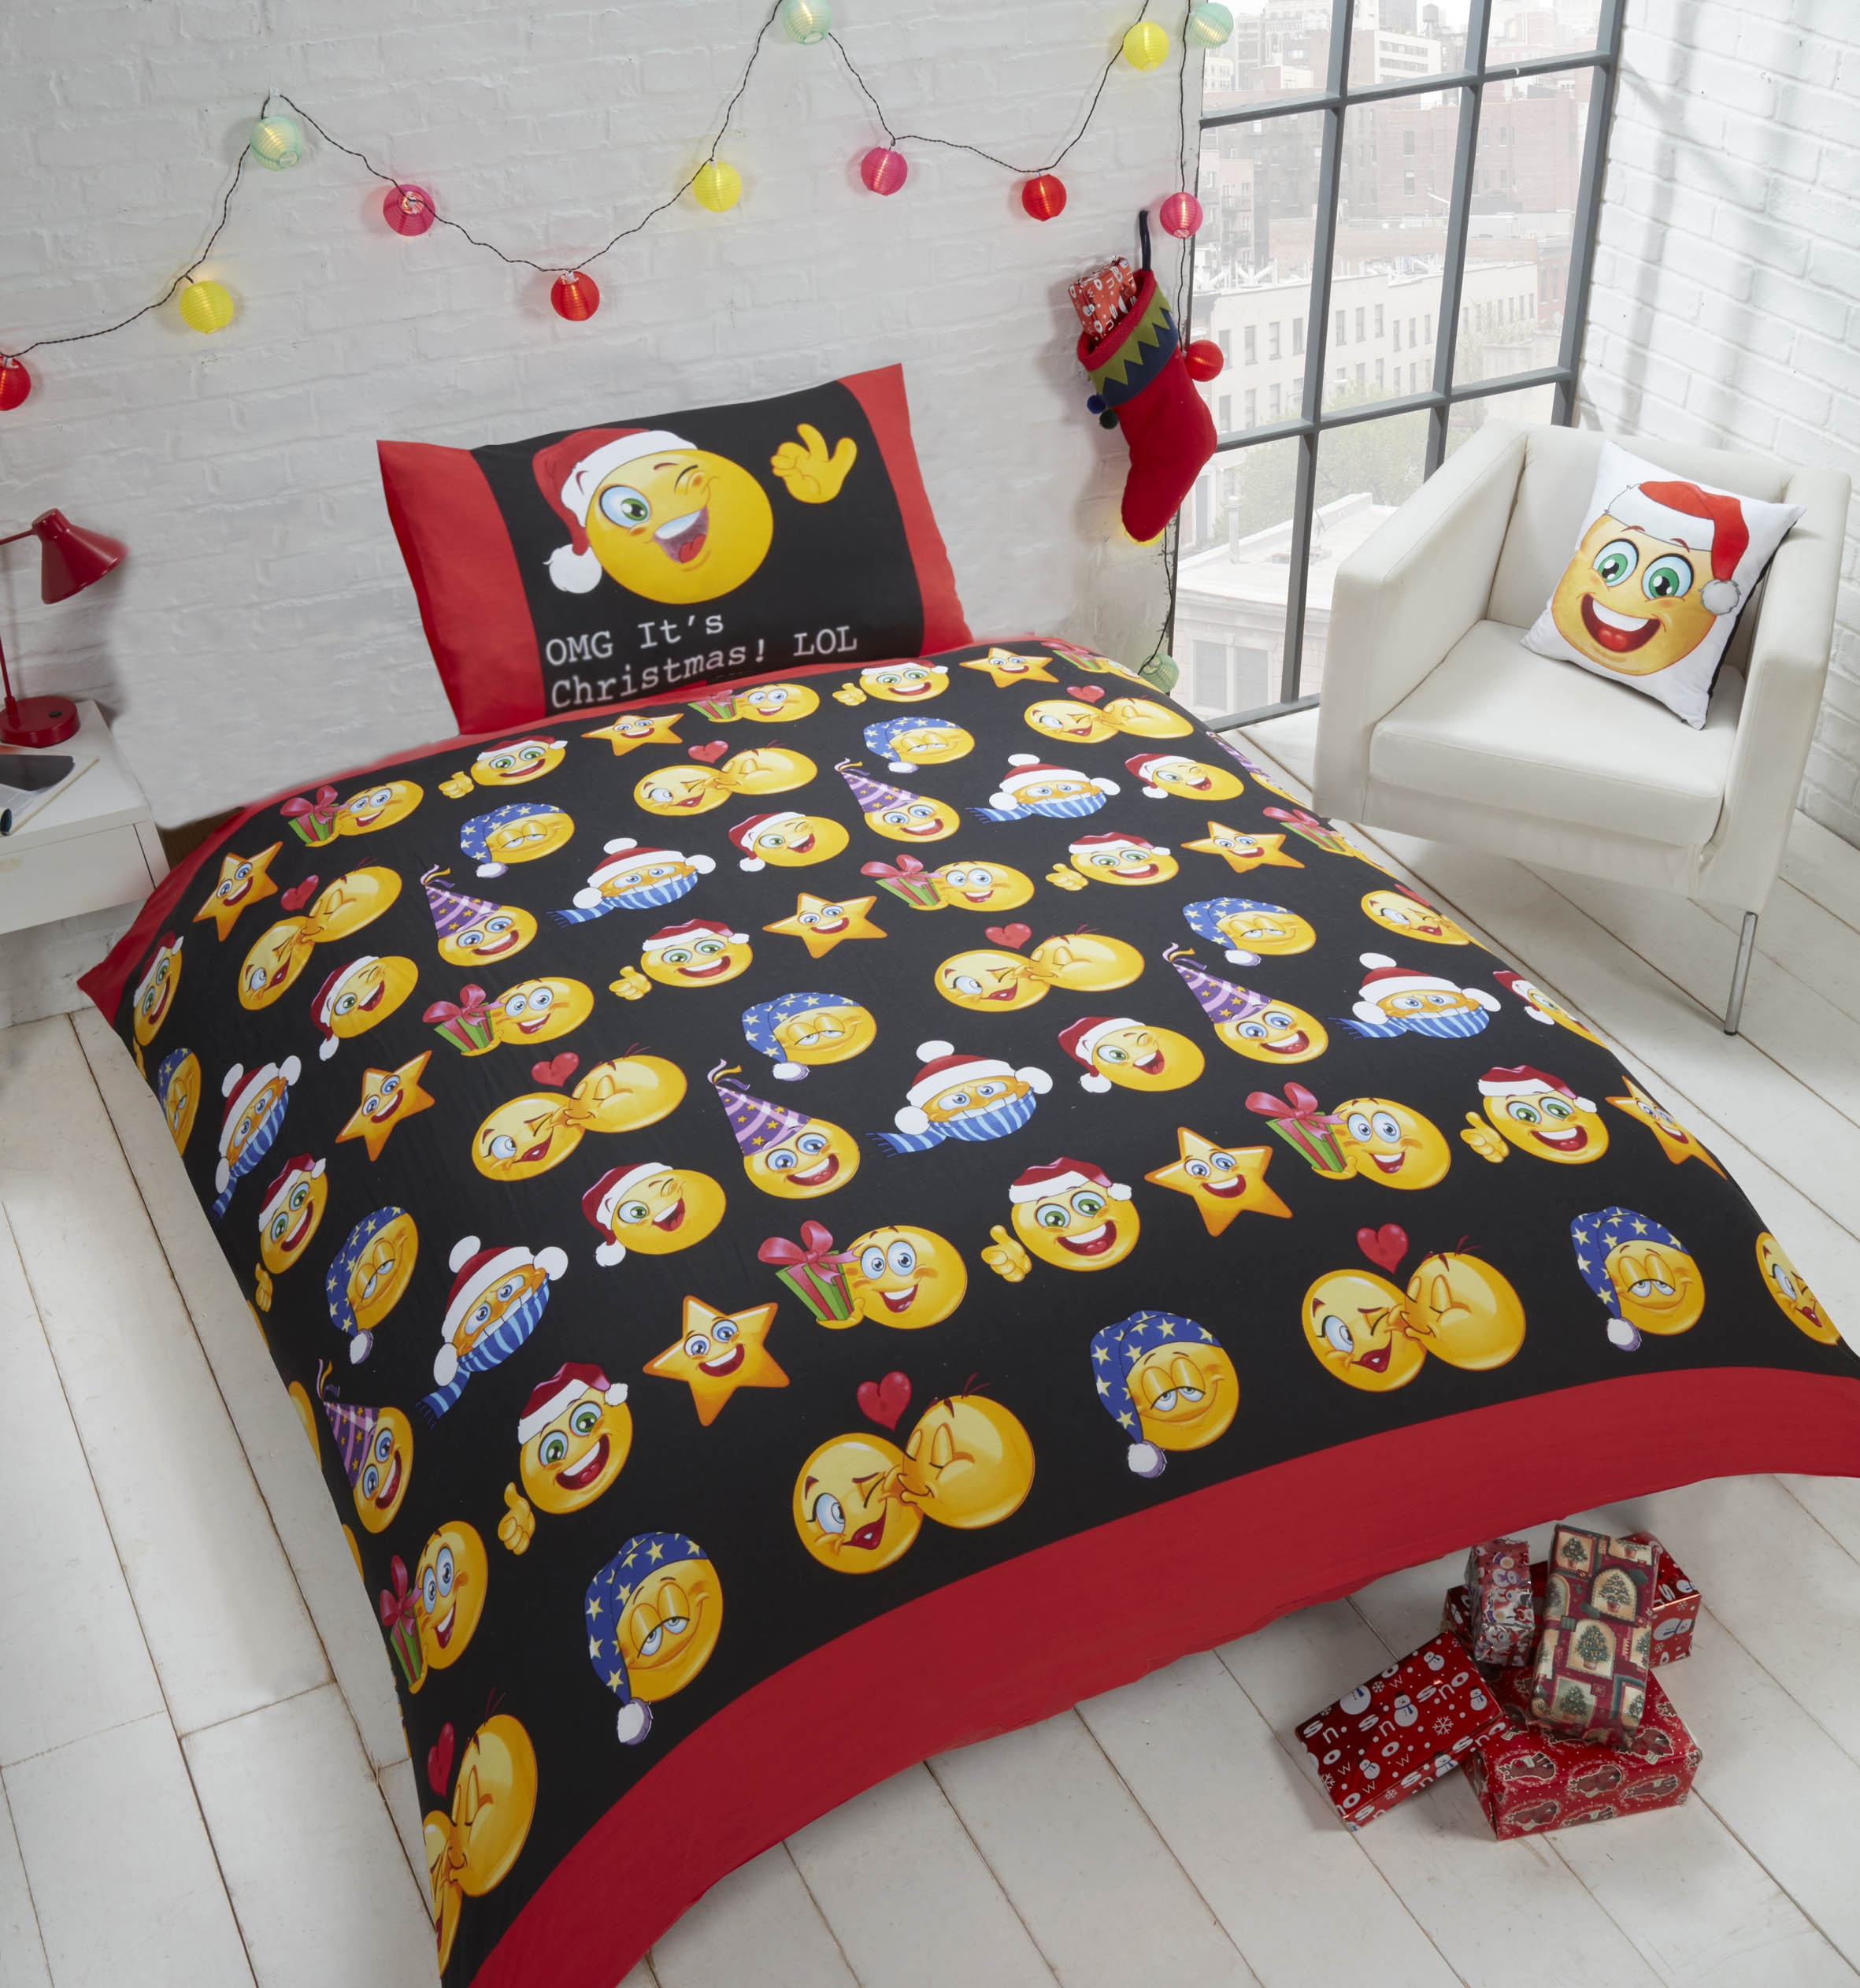 Emotions Emoticons 'Christmas Icons' Multi Reversible Rotary Single Bed Duvet Quilt Cover Set